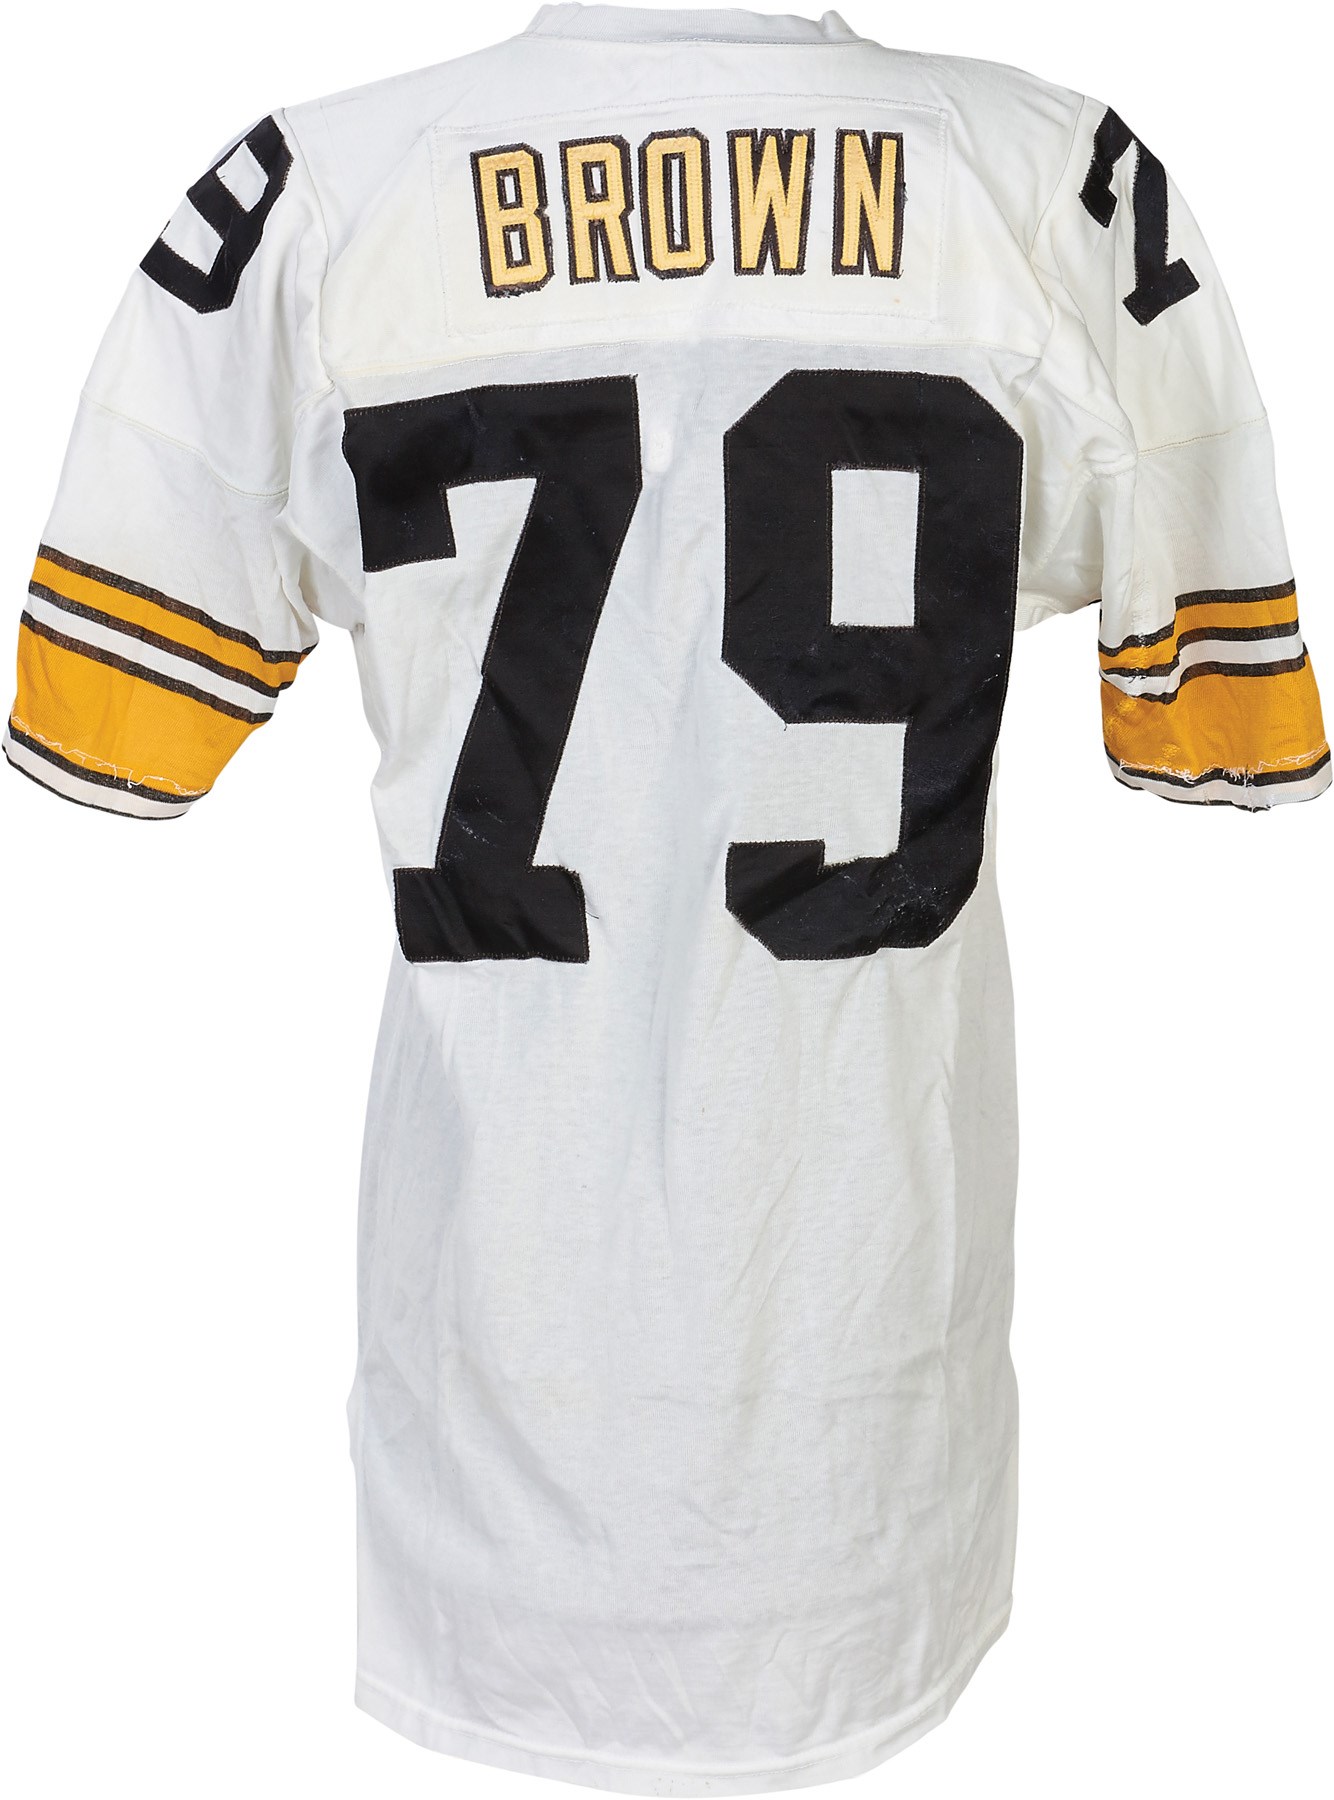 1981 Larry Brown Pittsburgh Steelers Game Worn Jersey